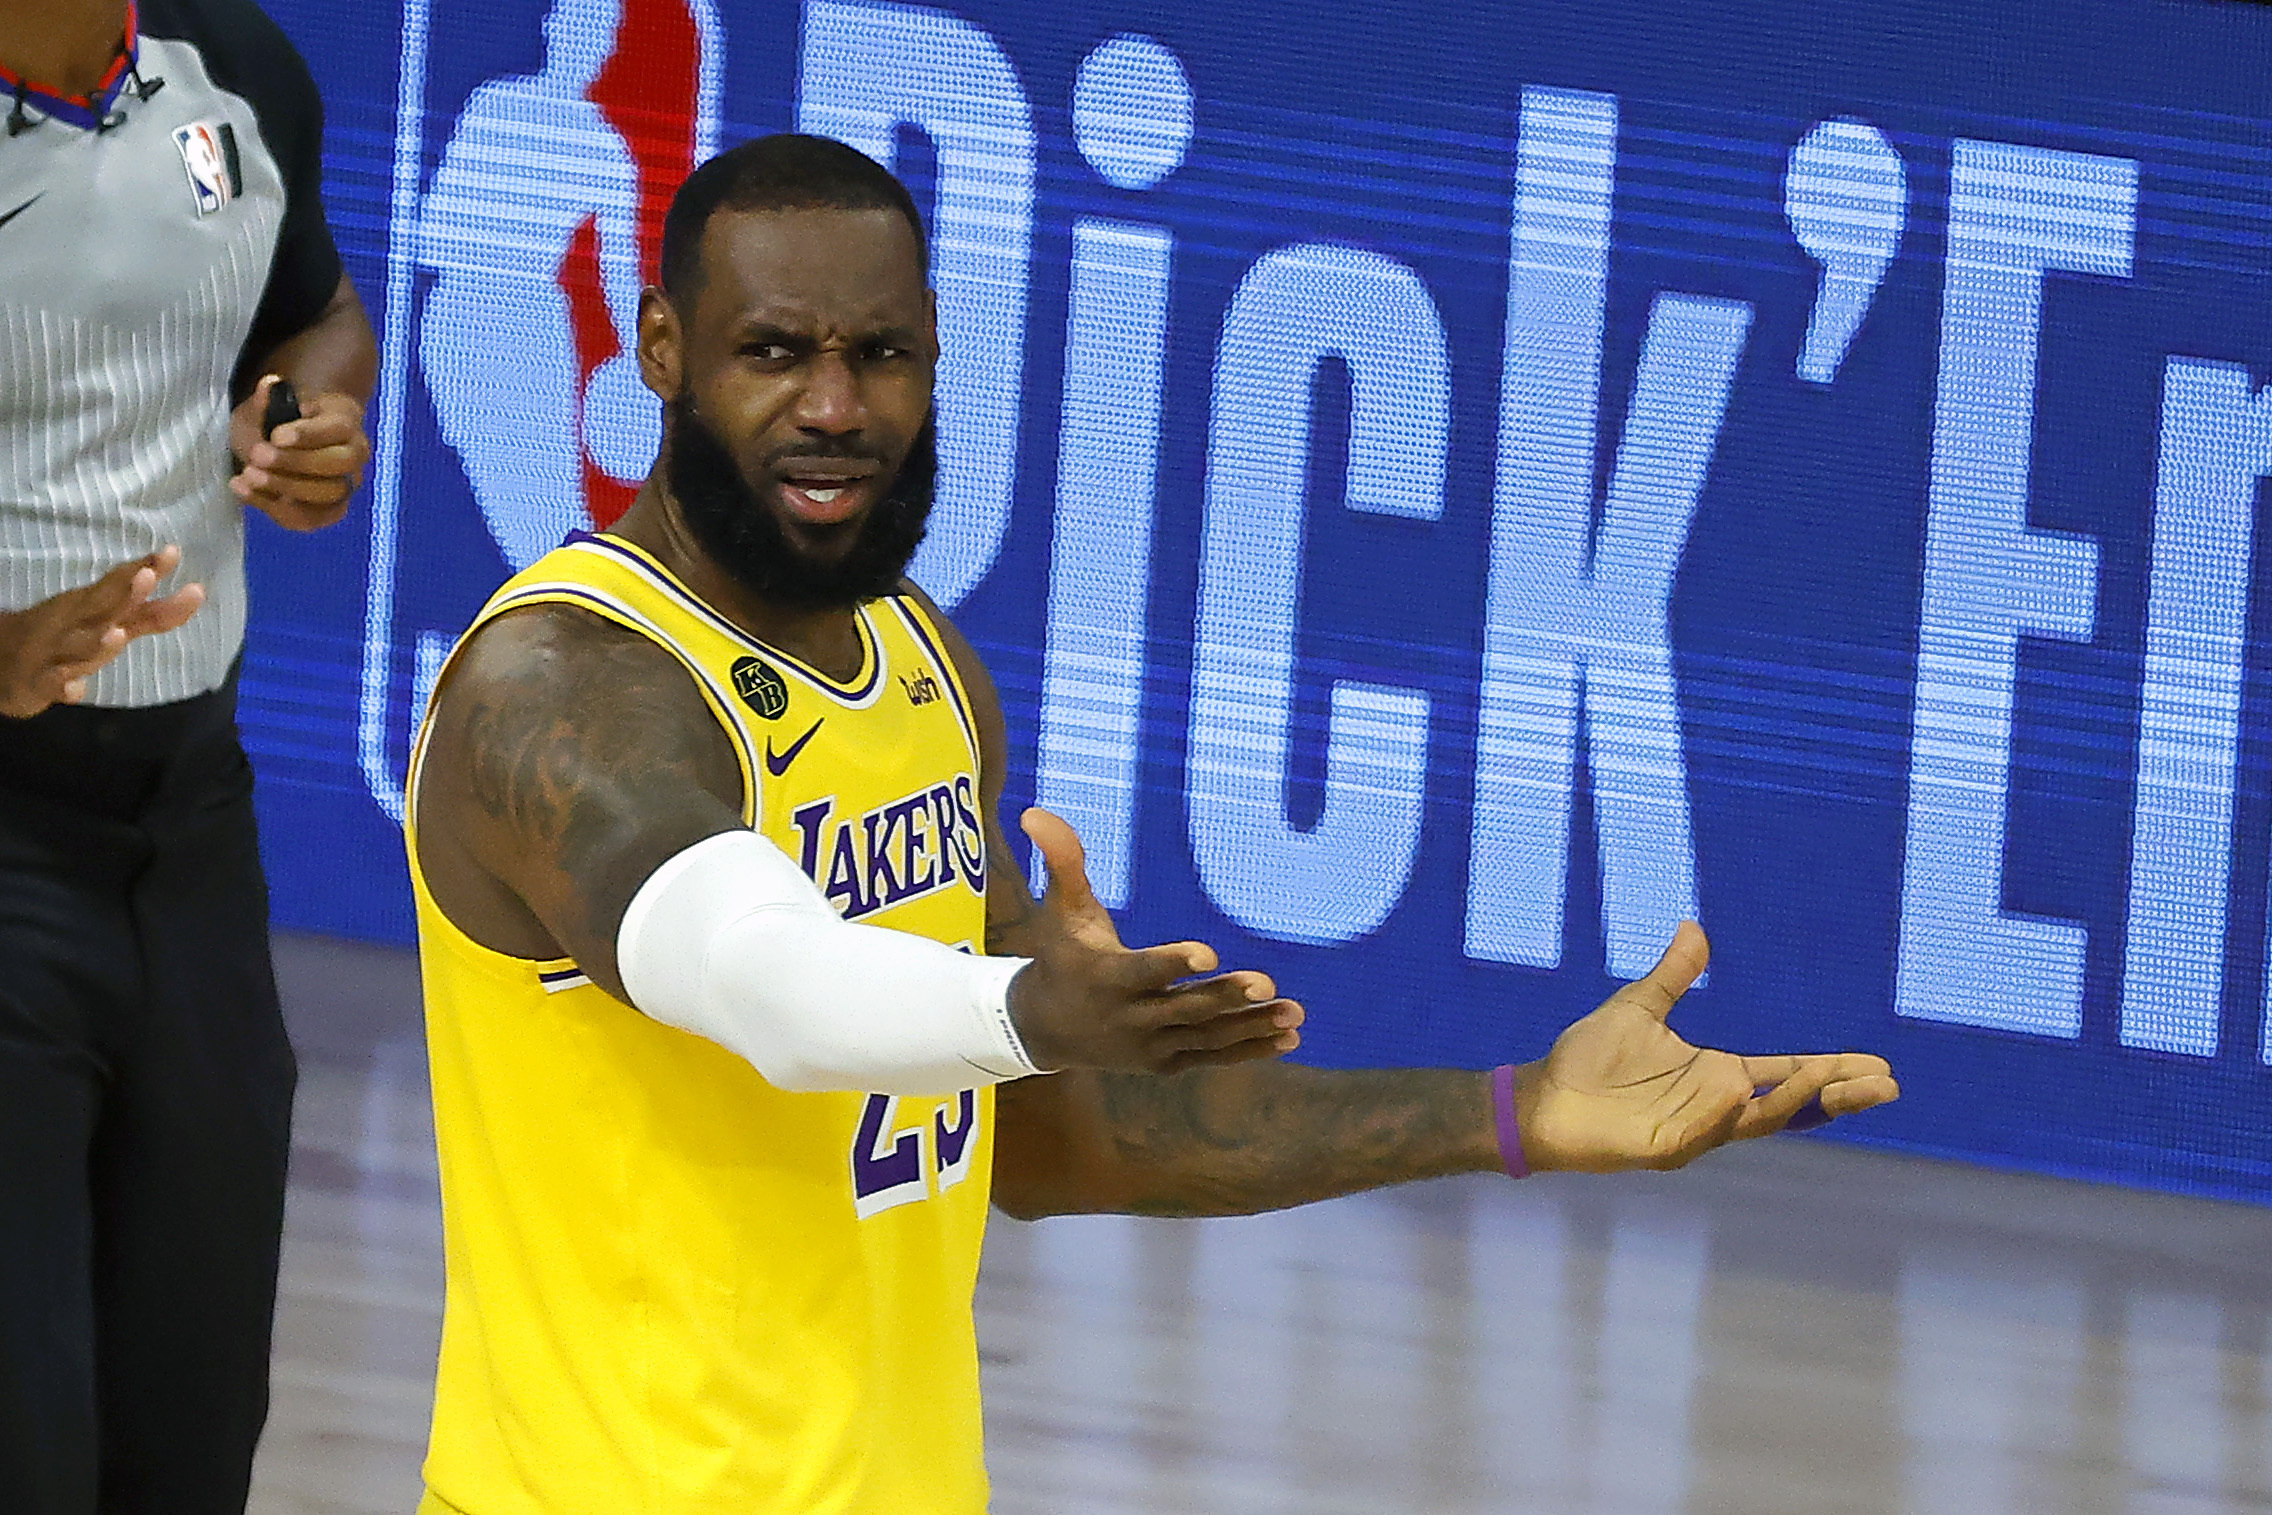 Ranking Los Angeles Lakers Biggest First Round Threats In 2020 Nba Playoffs Bleacher Report Latest News Videos And Highlights